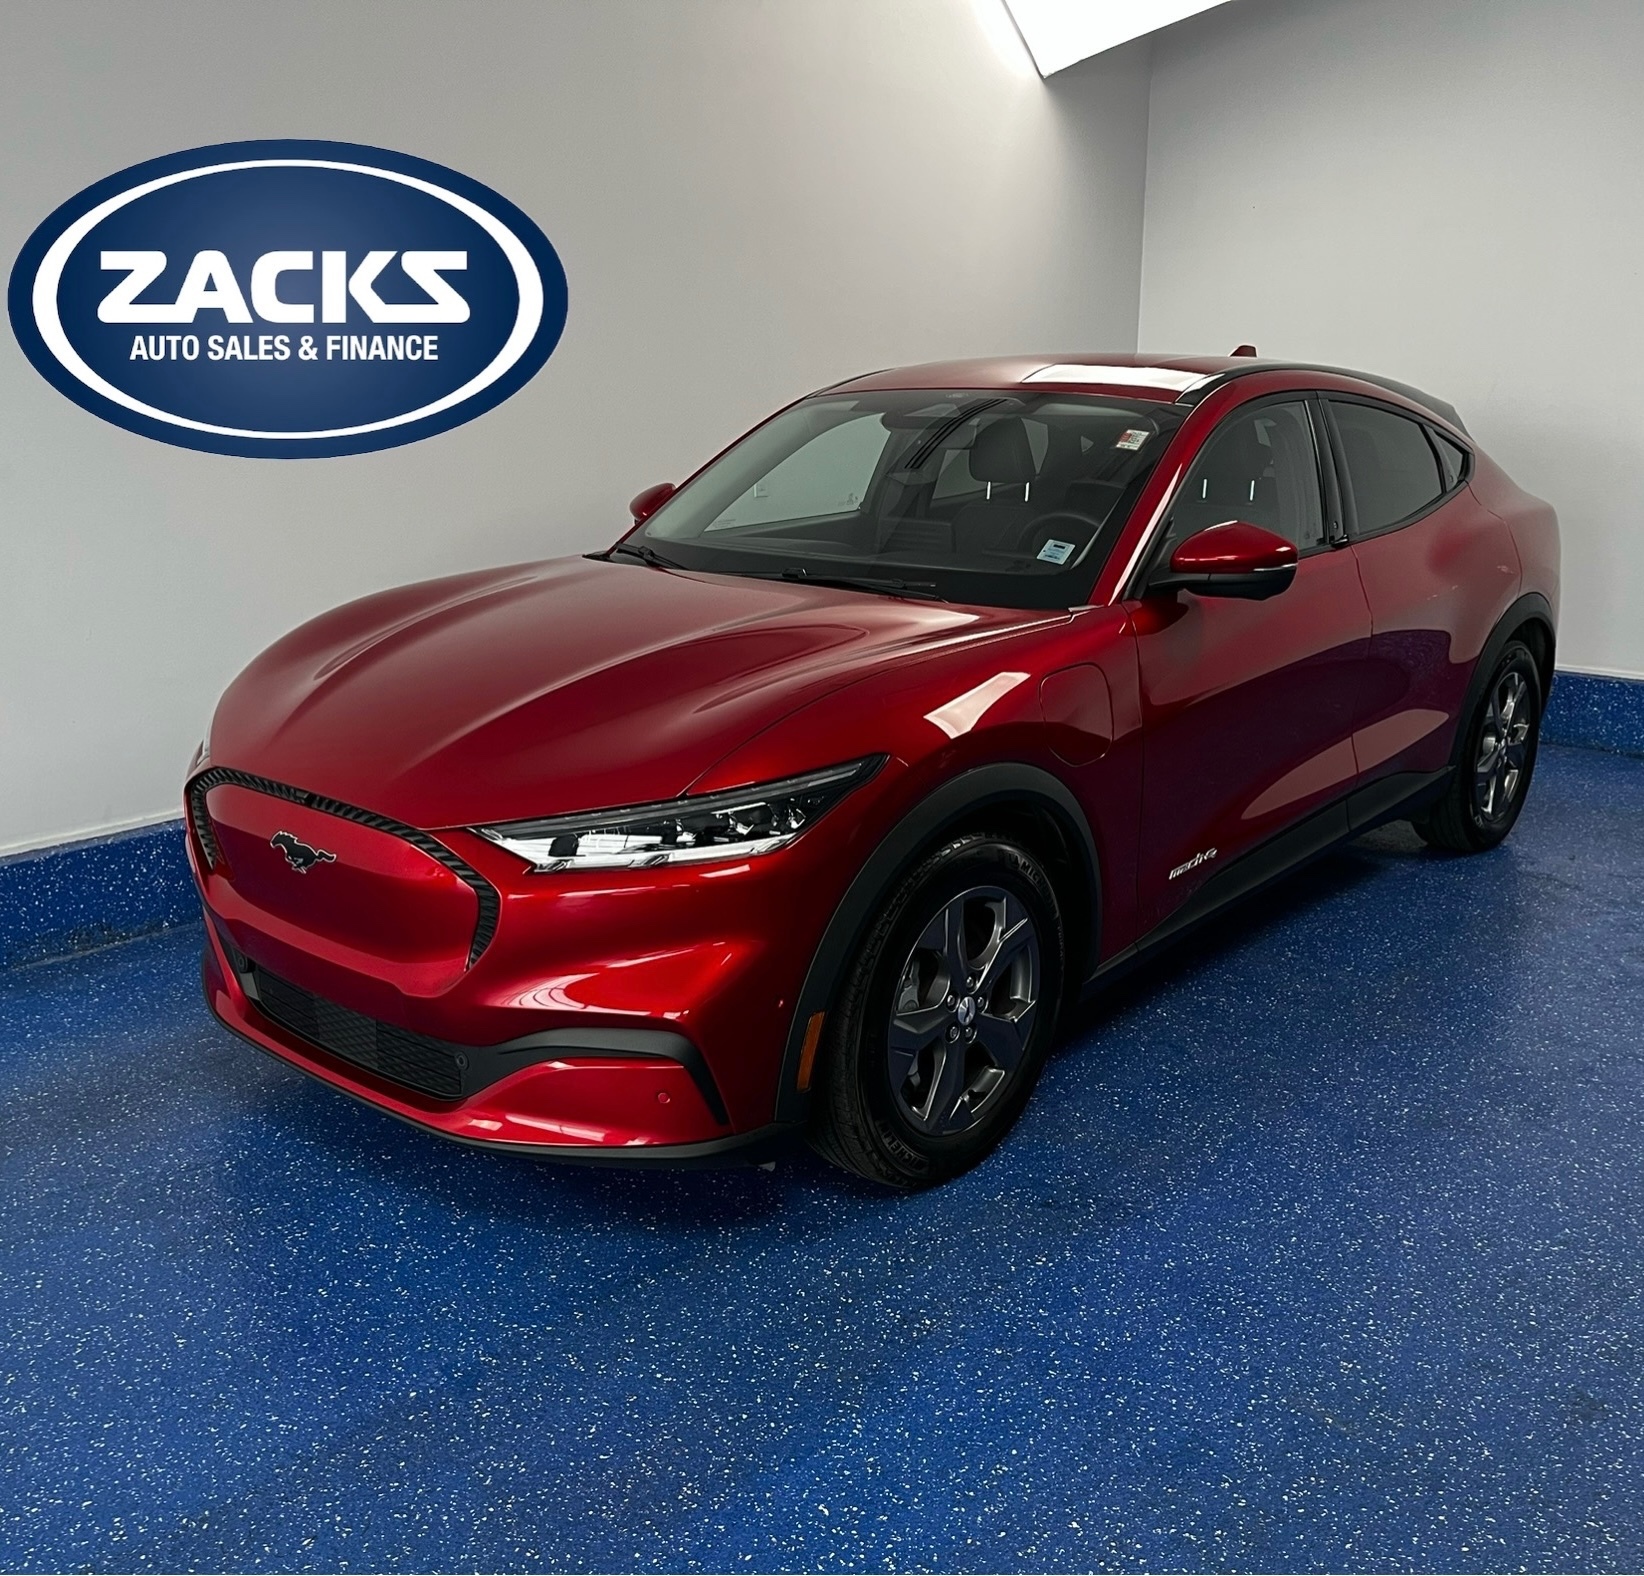 2021 Ford Mustang Mach-E Select AWD | Zacks Certified | Ask about Provincia